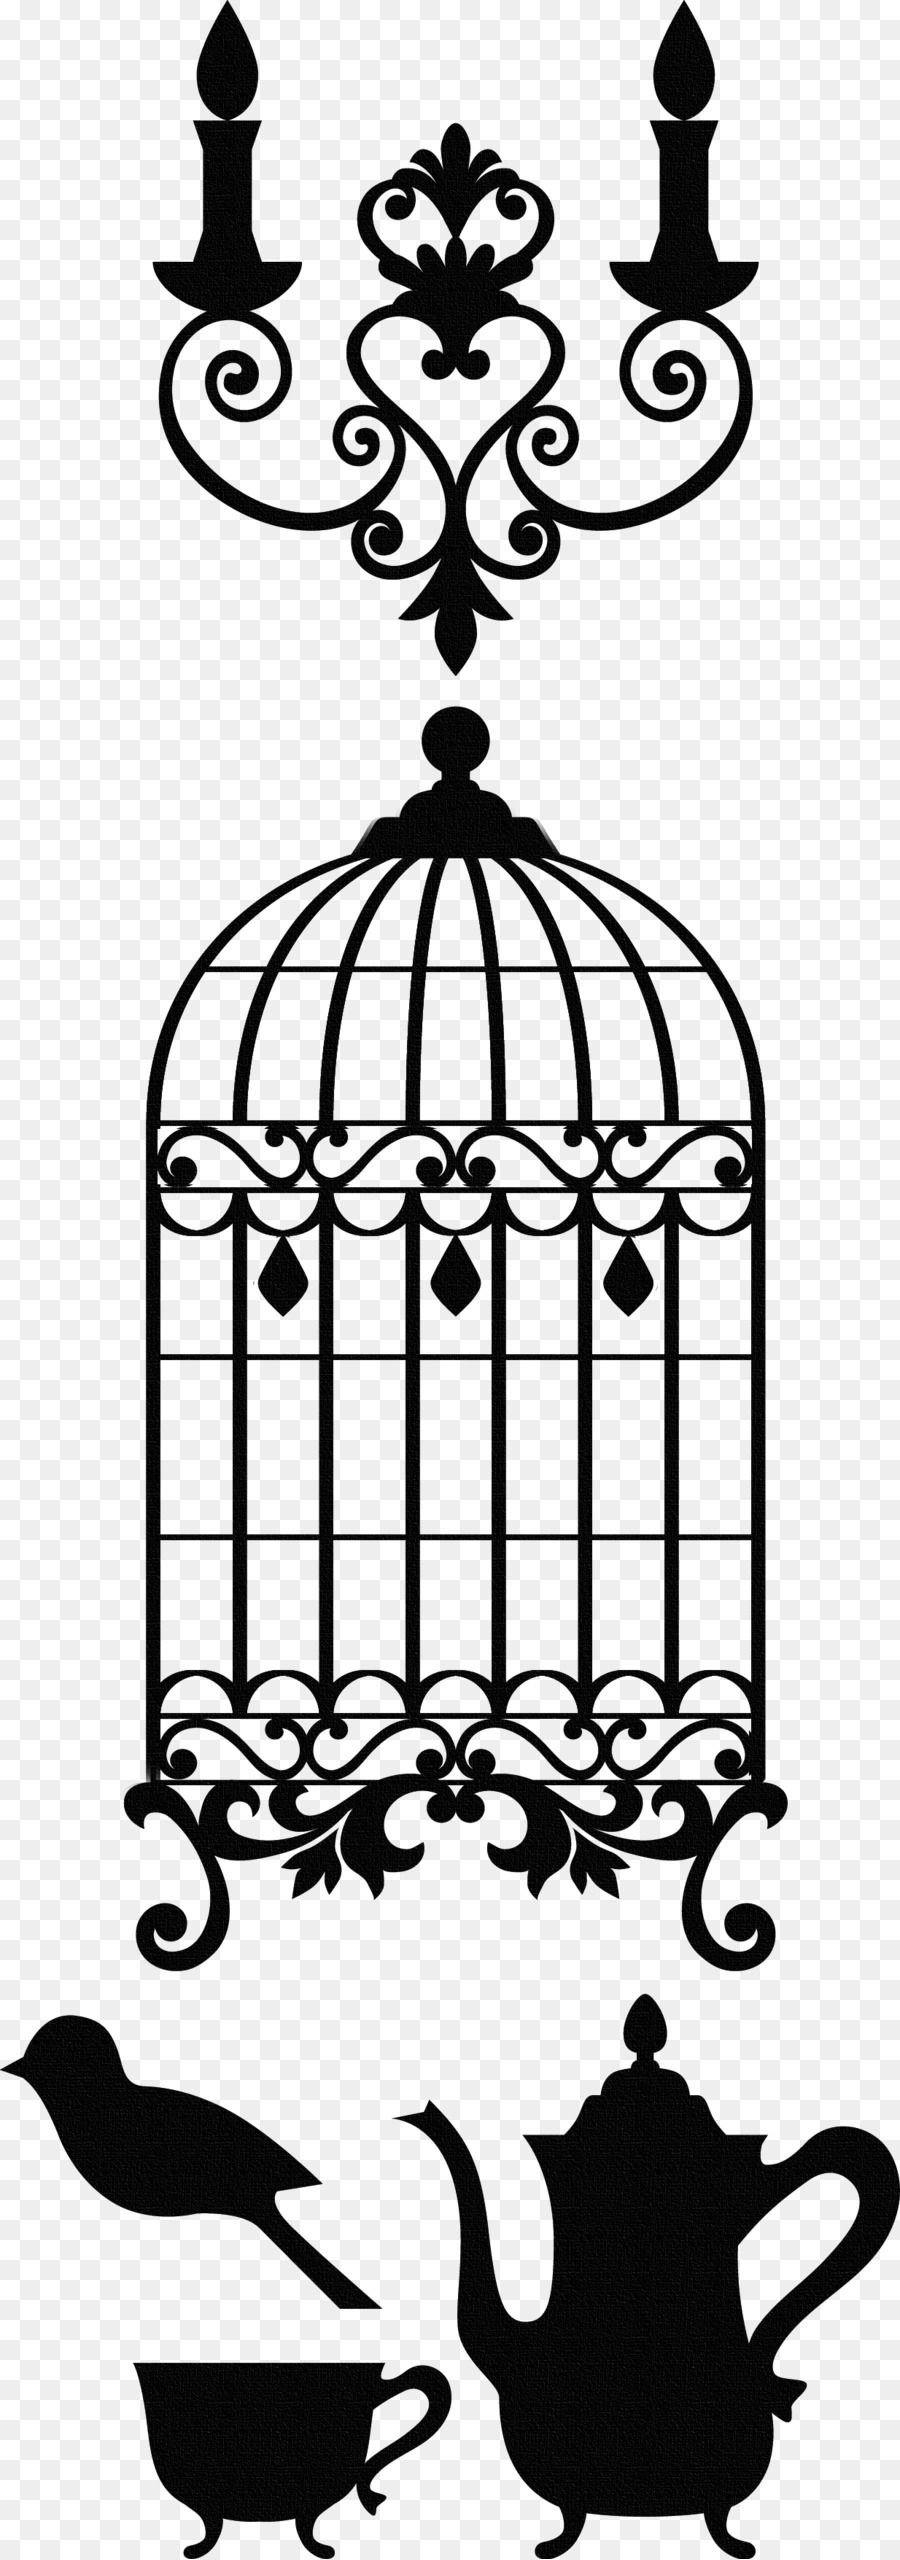 Table Antique furniture Clip art - Black silhouette of a birdcage lamp png download - 1234*3509 - Free Transparent Table png Download.